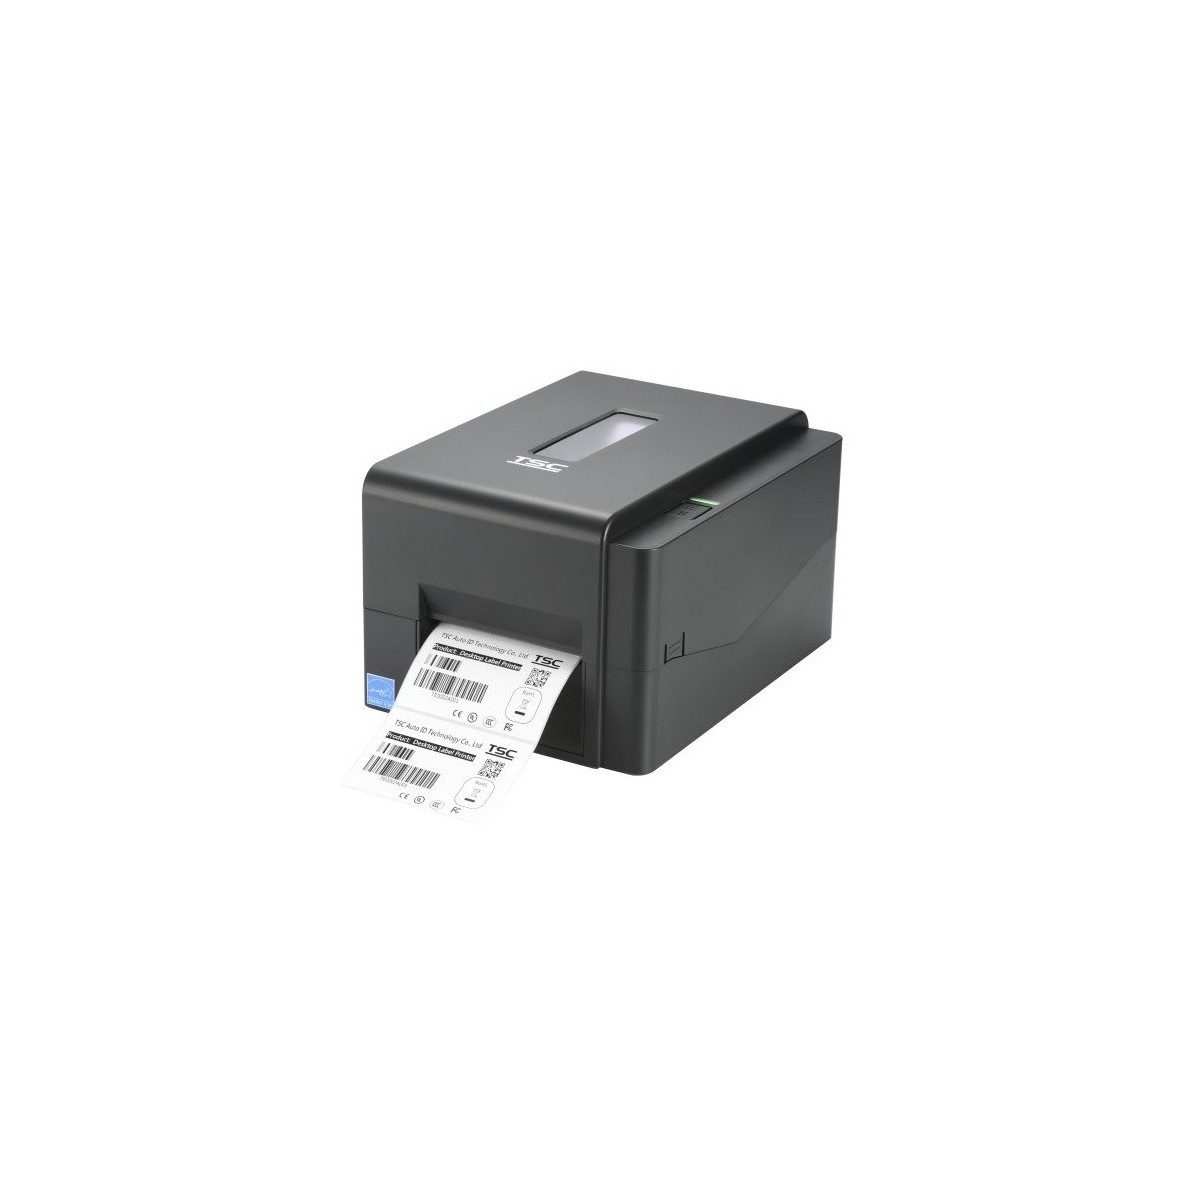 TSC TE210 - Direct thermal / Thermal transfer - 300 x 300 DPI - 127 mm/sec - Wired - Black